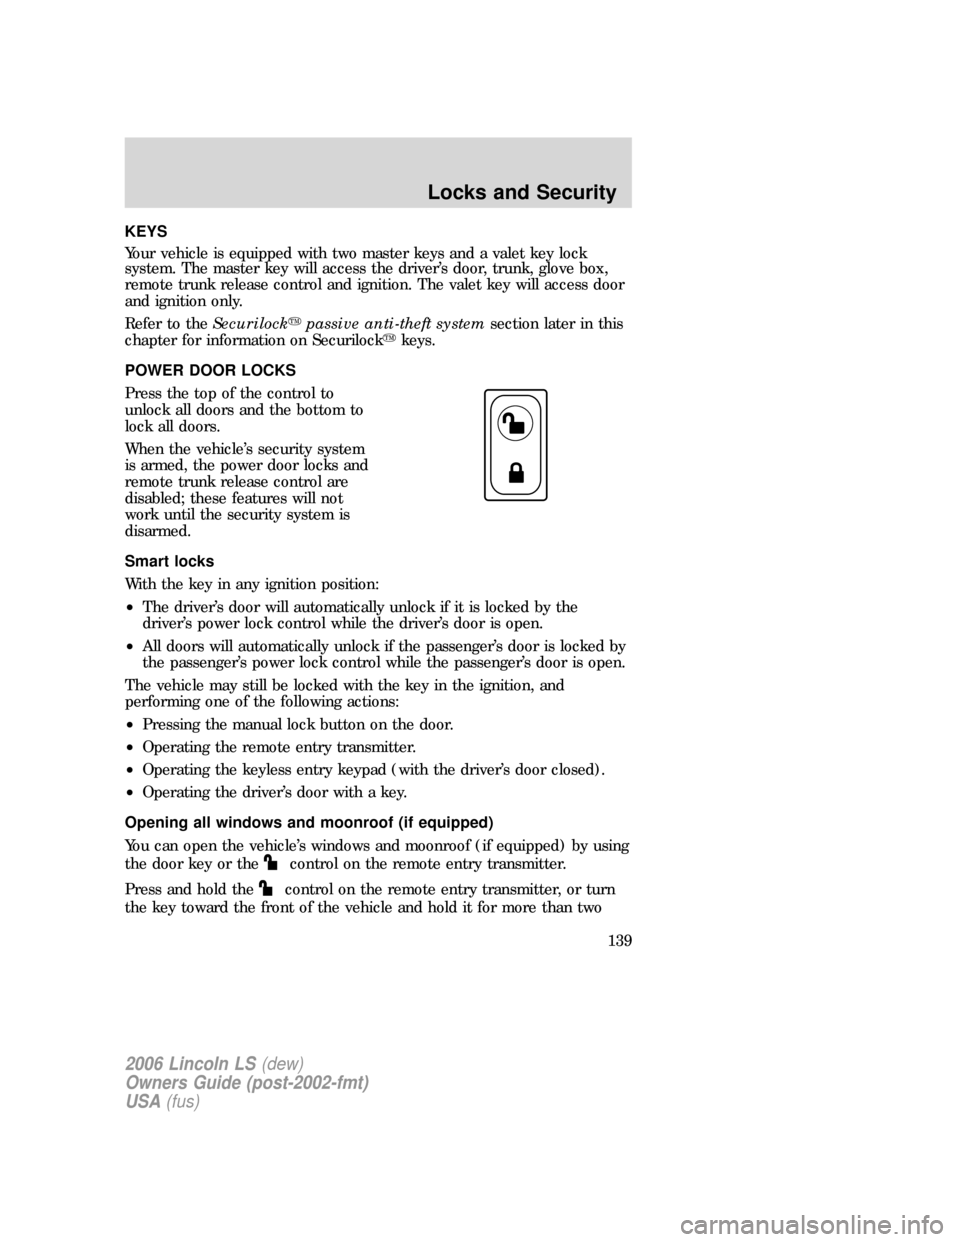 LINCOLN LS 2006  Owners Manual KEYS
Your vehicle is equipped with two master keys and a valet key lock
system. The master key will access the driver’s door, trunk, glove box,
remote trunk release control and ignition. The valet k